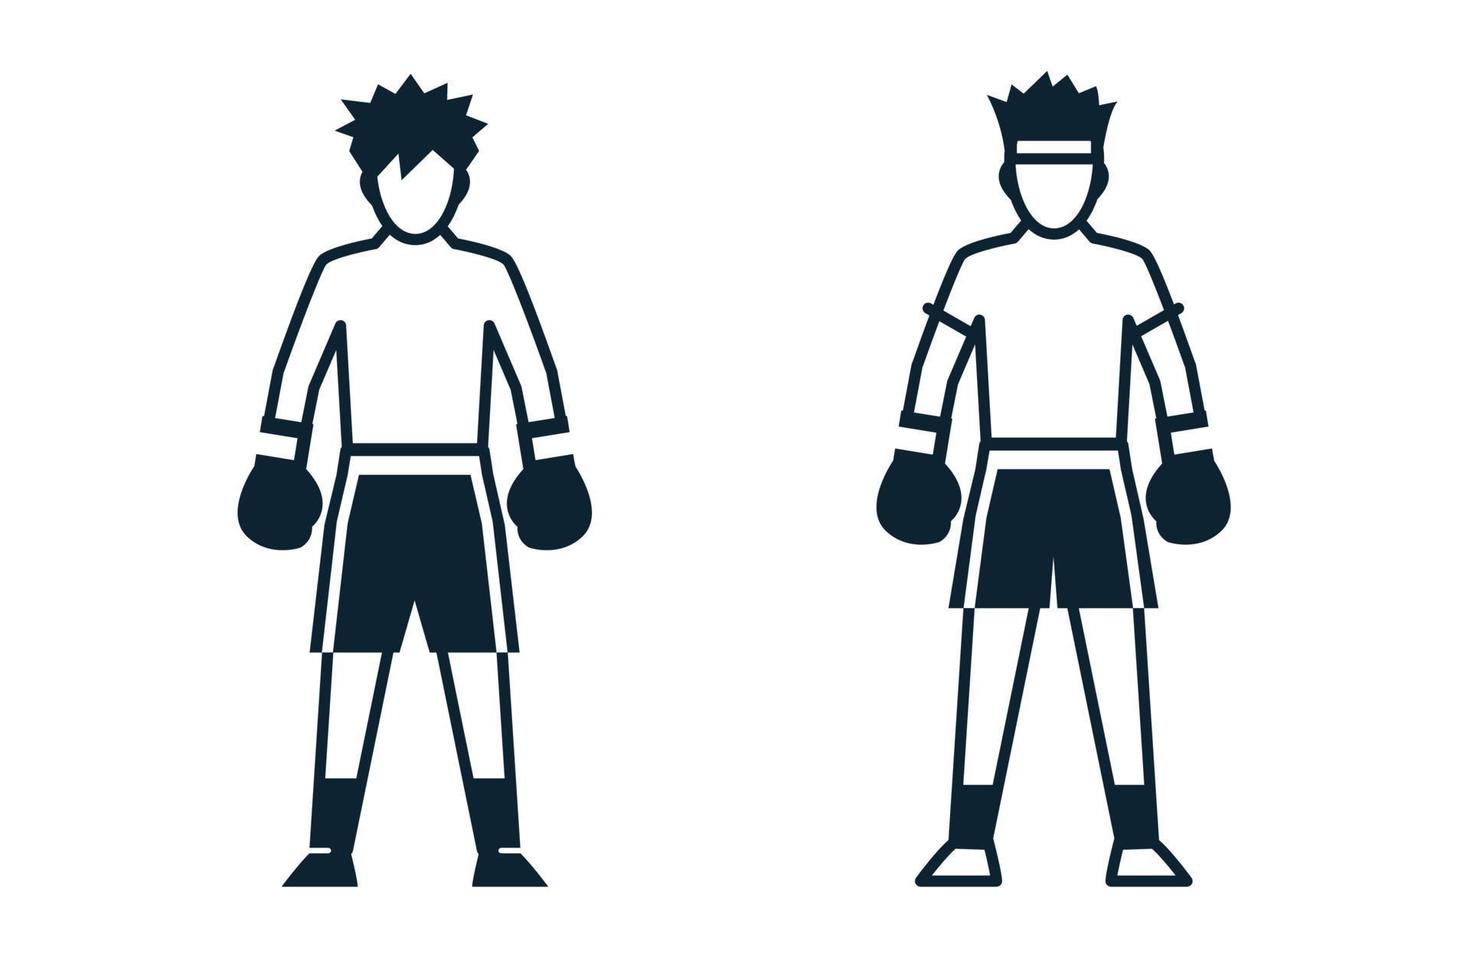 Thai Boxing, Muaythai, Boxing, Sport Player, People and Clothing icons with White Background vector